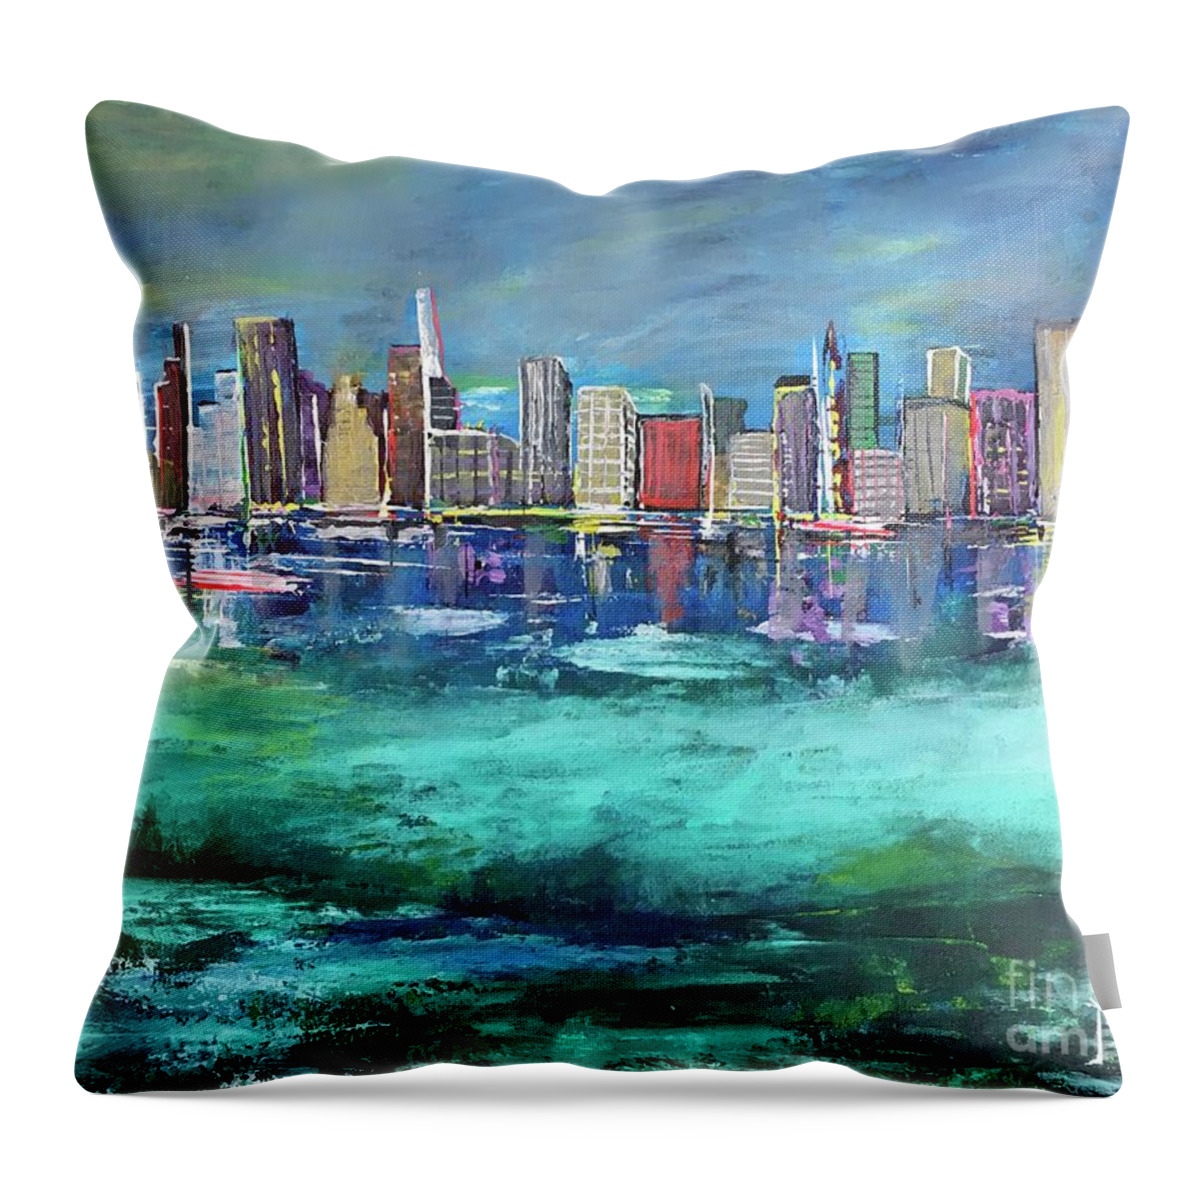  Throw Pillow featuring the painting Chicago Skyline by Maria Karlosak